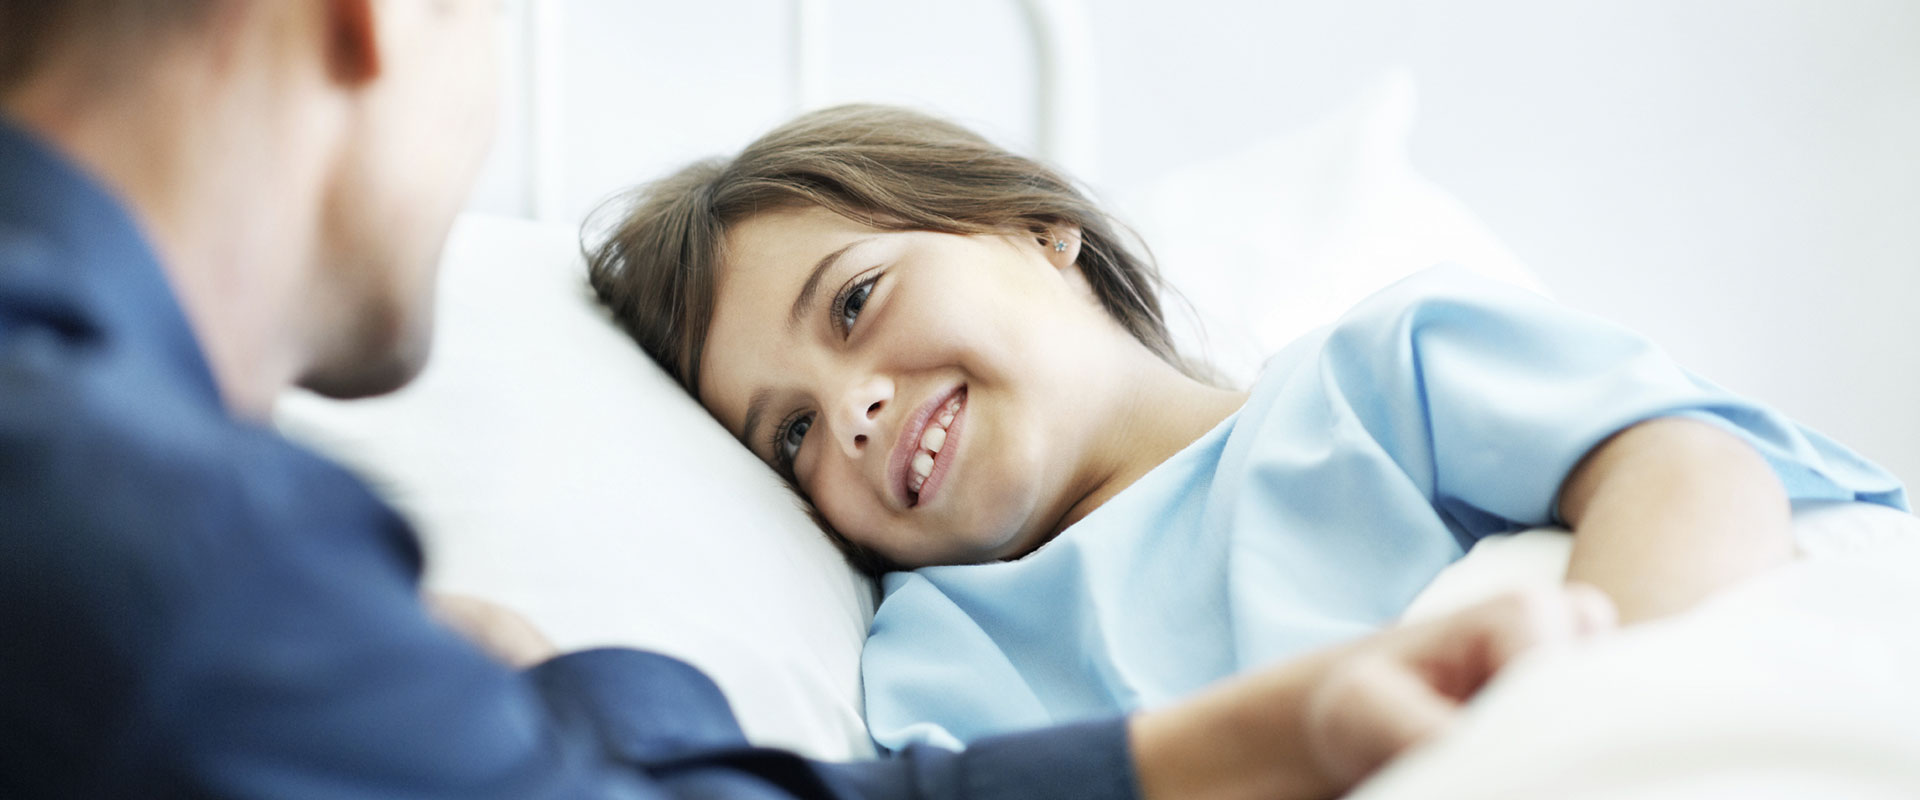 Image - smiling child in hospital bed